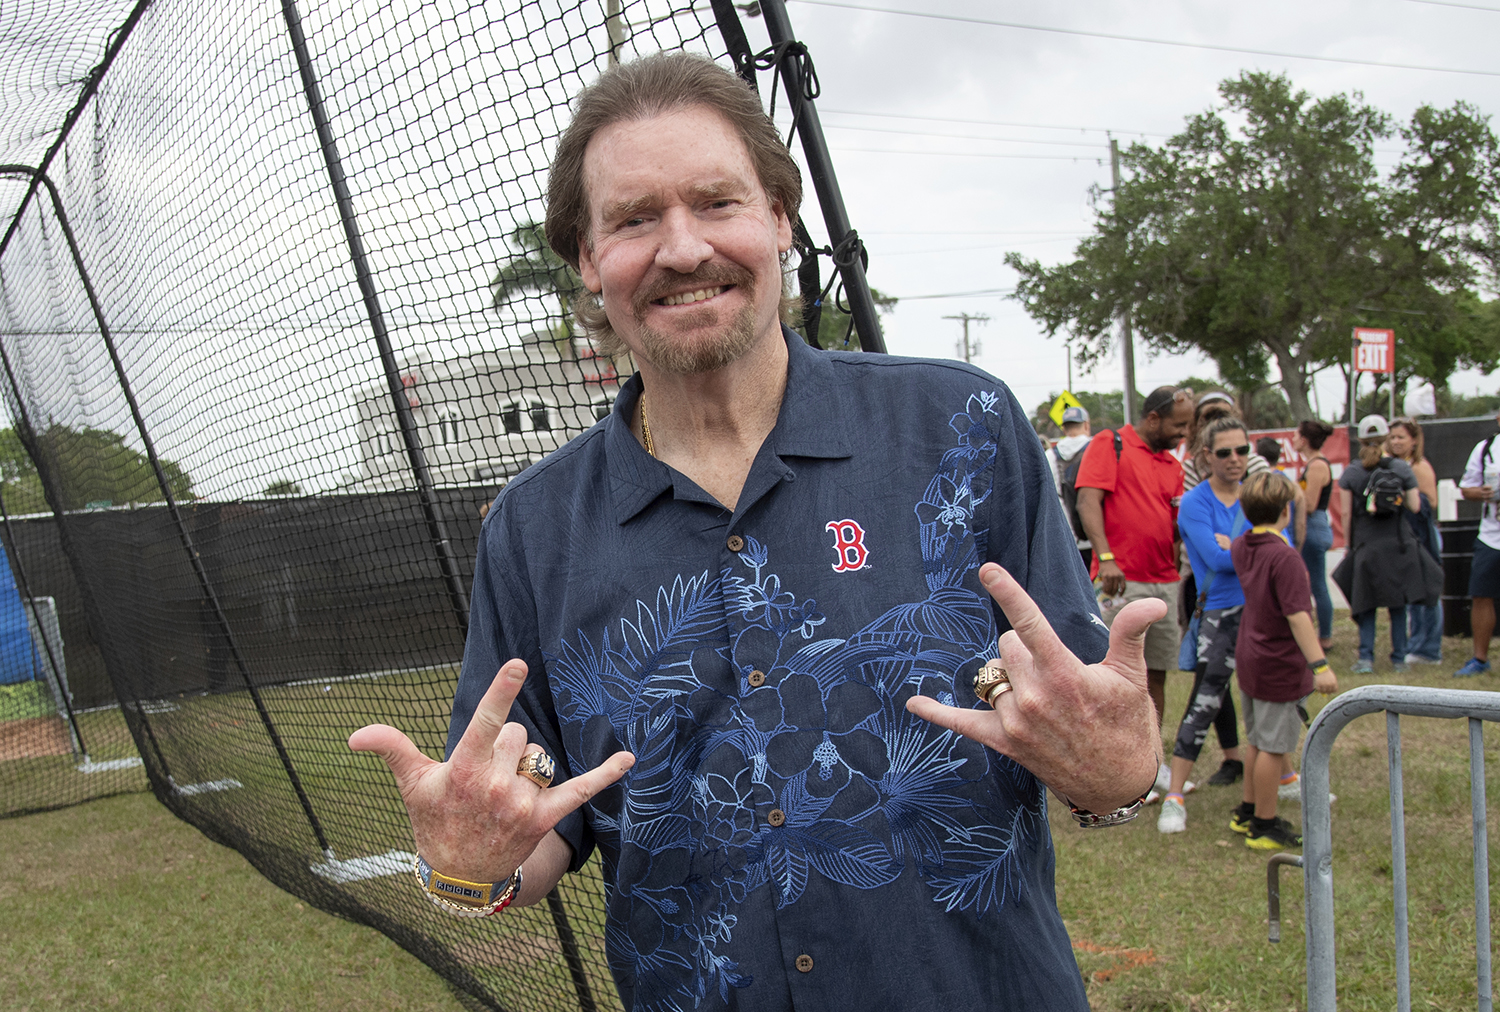 Wade Boggs says today's MLB is 'just difficult to watch at times